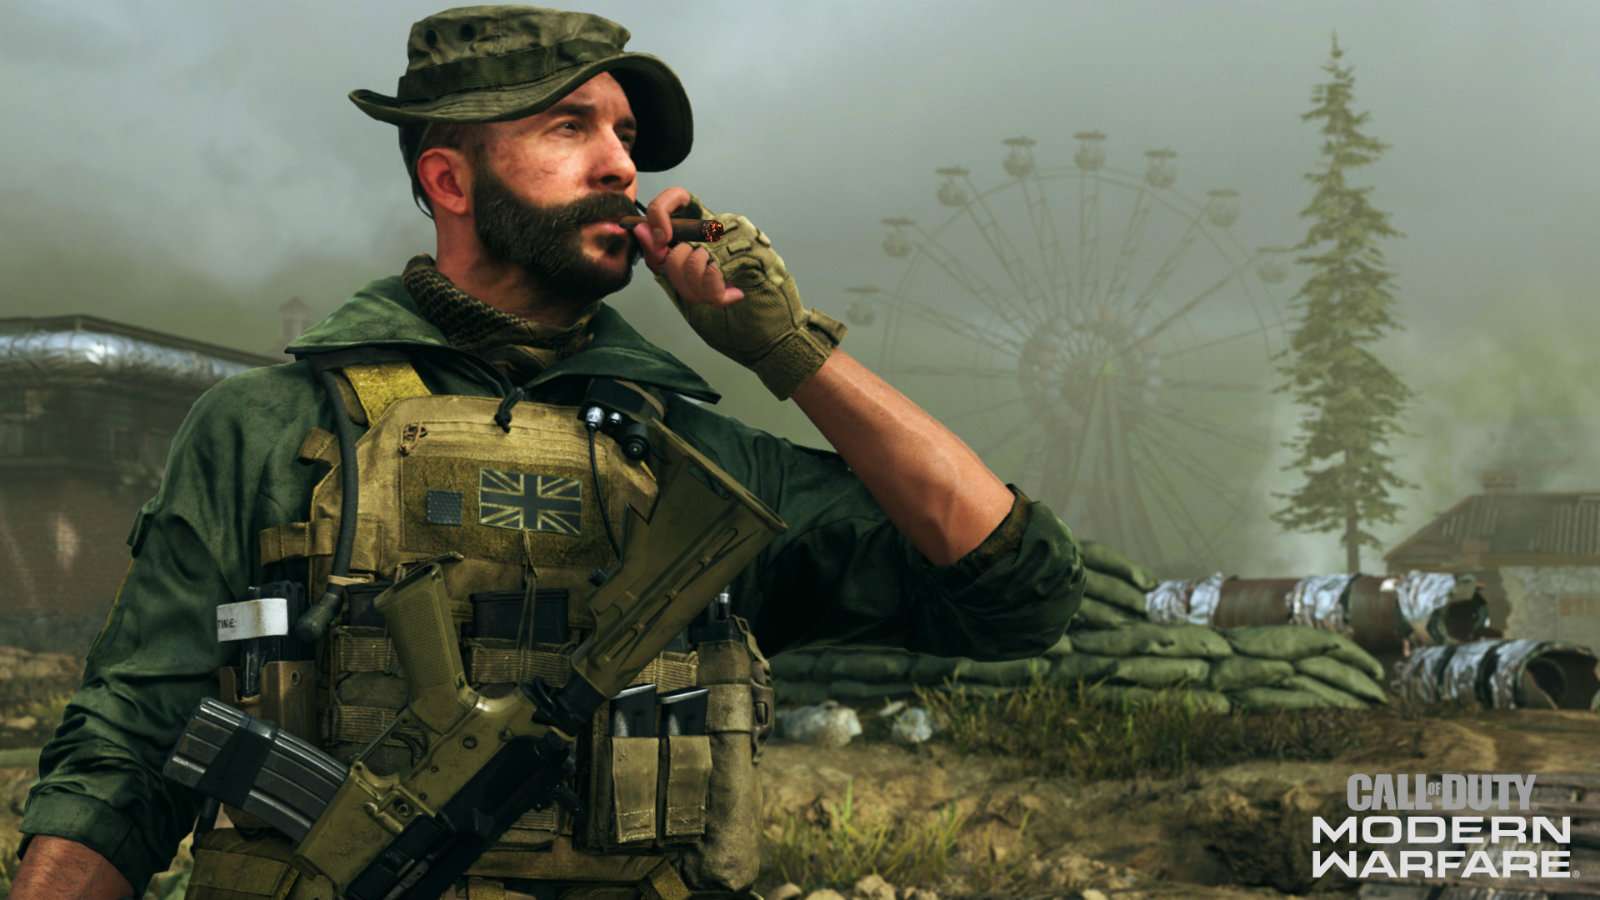 Captain Price smokes a cigar while overlooking battlefield in Call of Duty: Modern Warfare